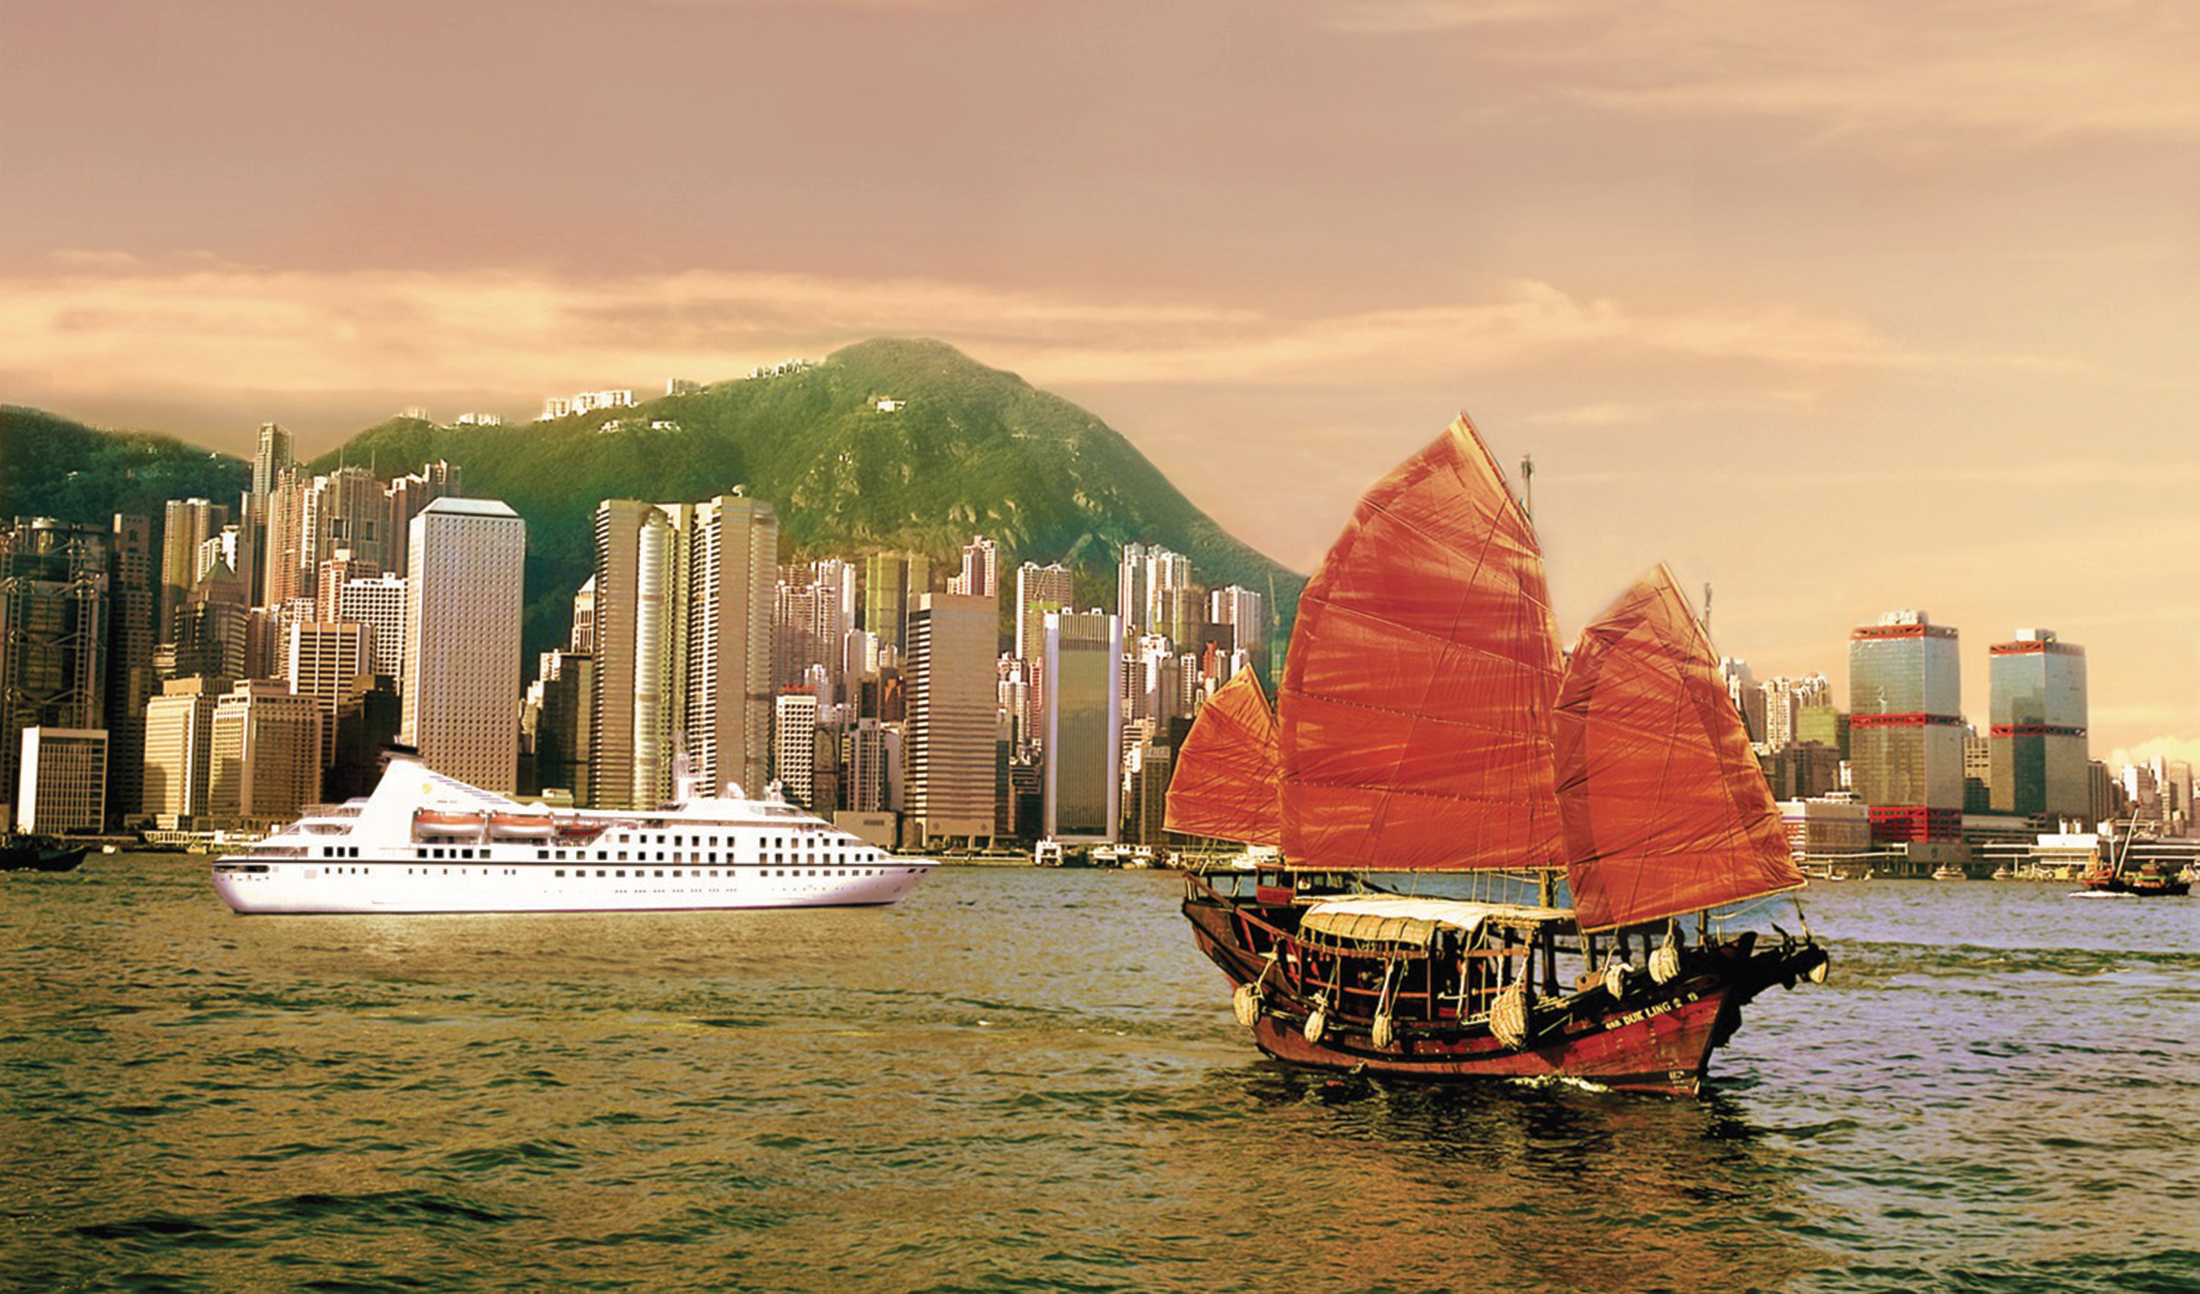 The Seabourn cruise ship in Hong Kong harbour. As well as being committed to environmentally responsible travel, Carnival Corporation does its utmost to promote travellers' experiences